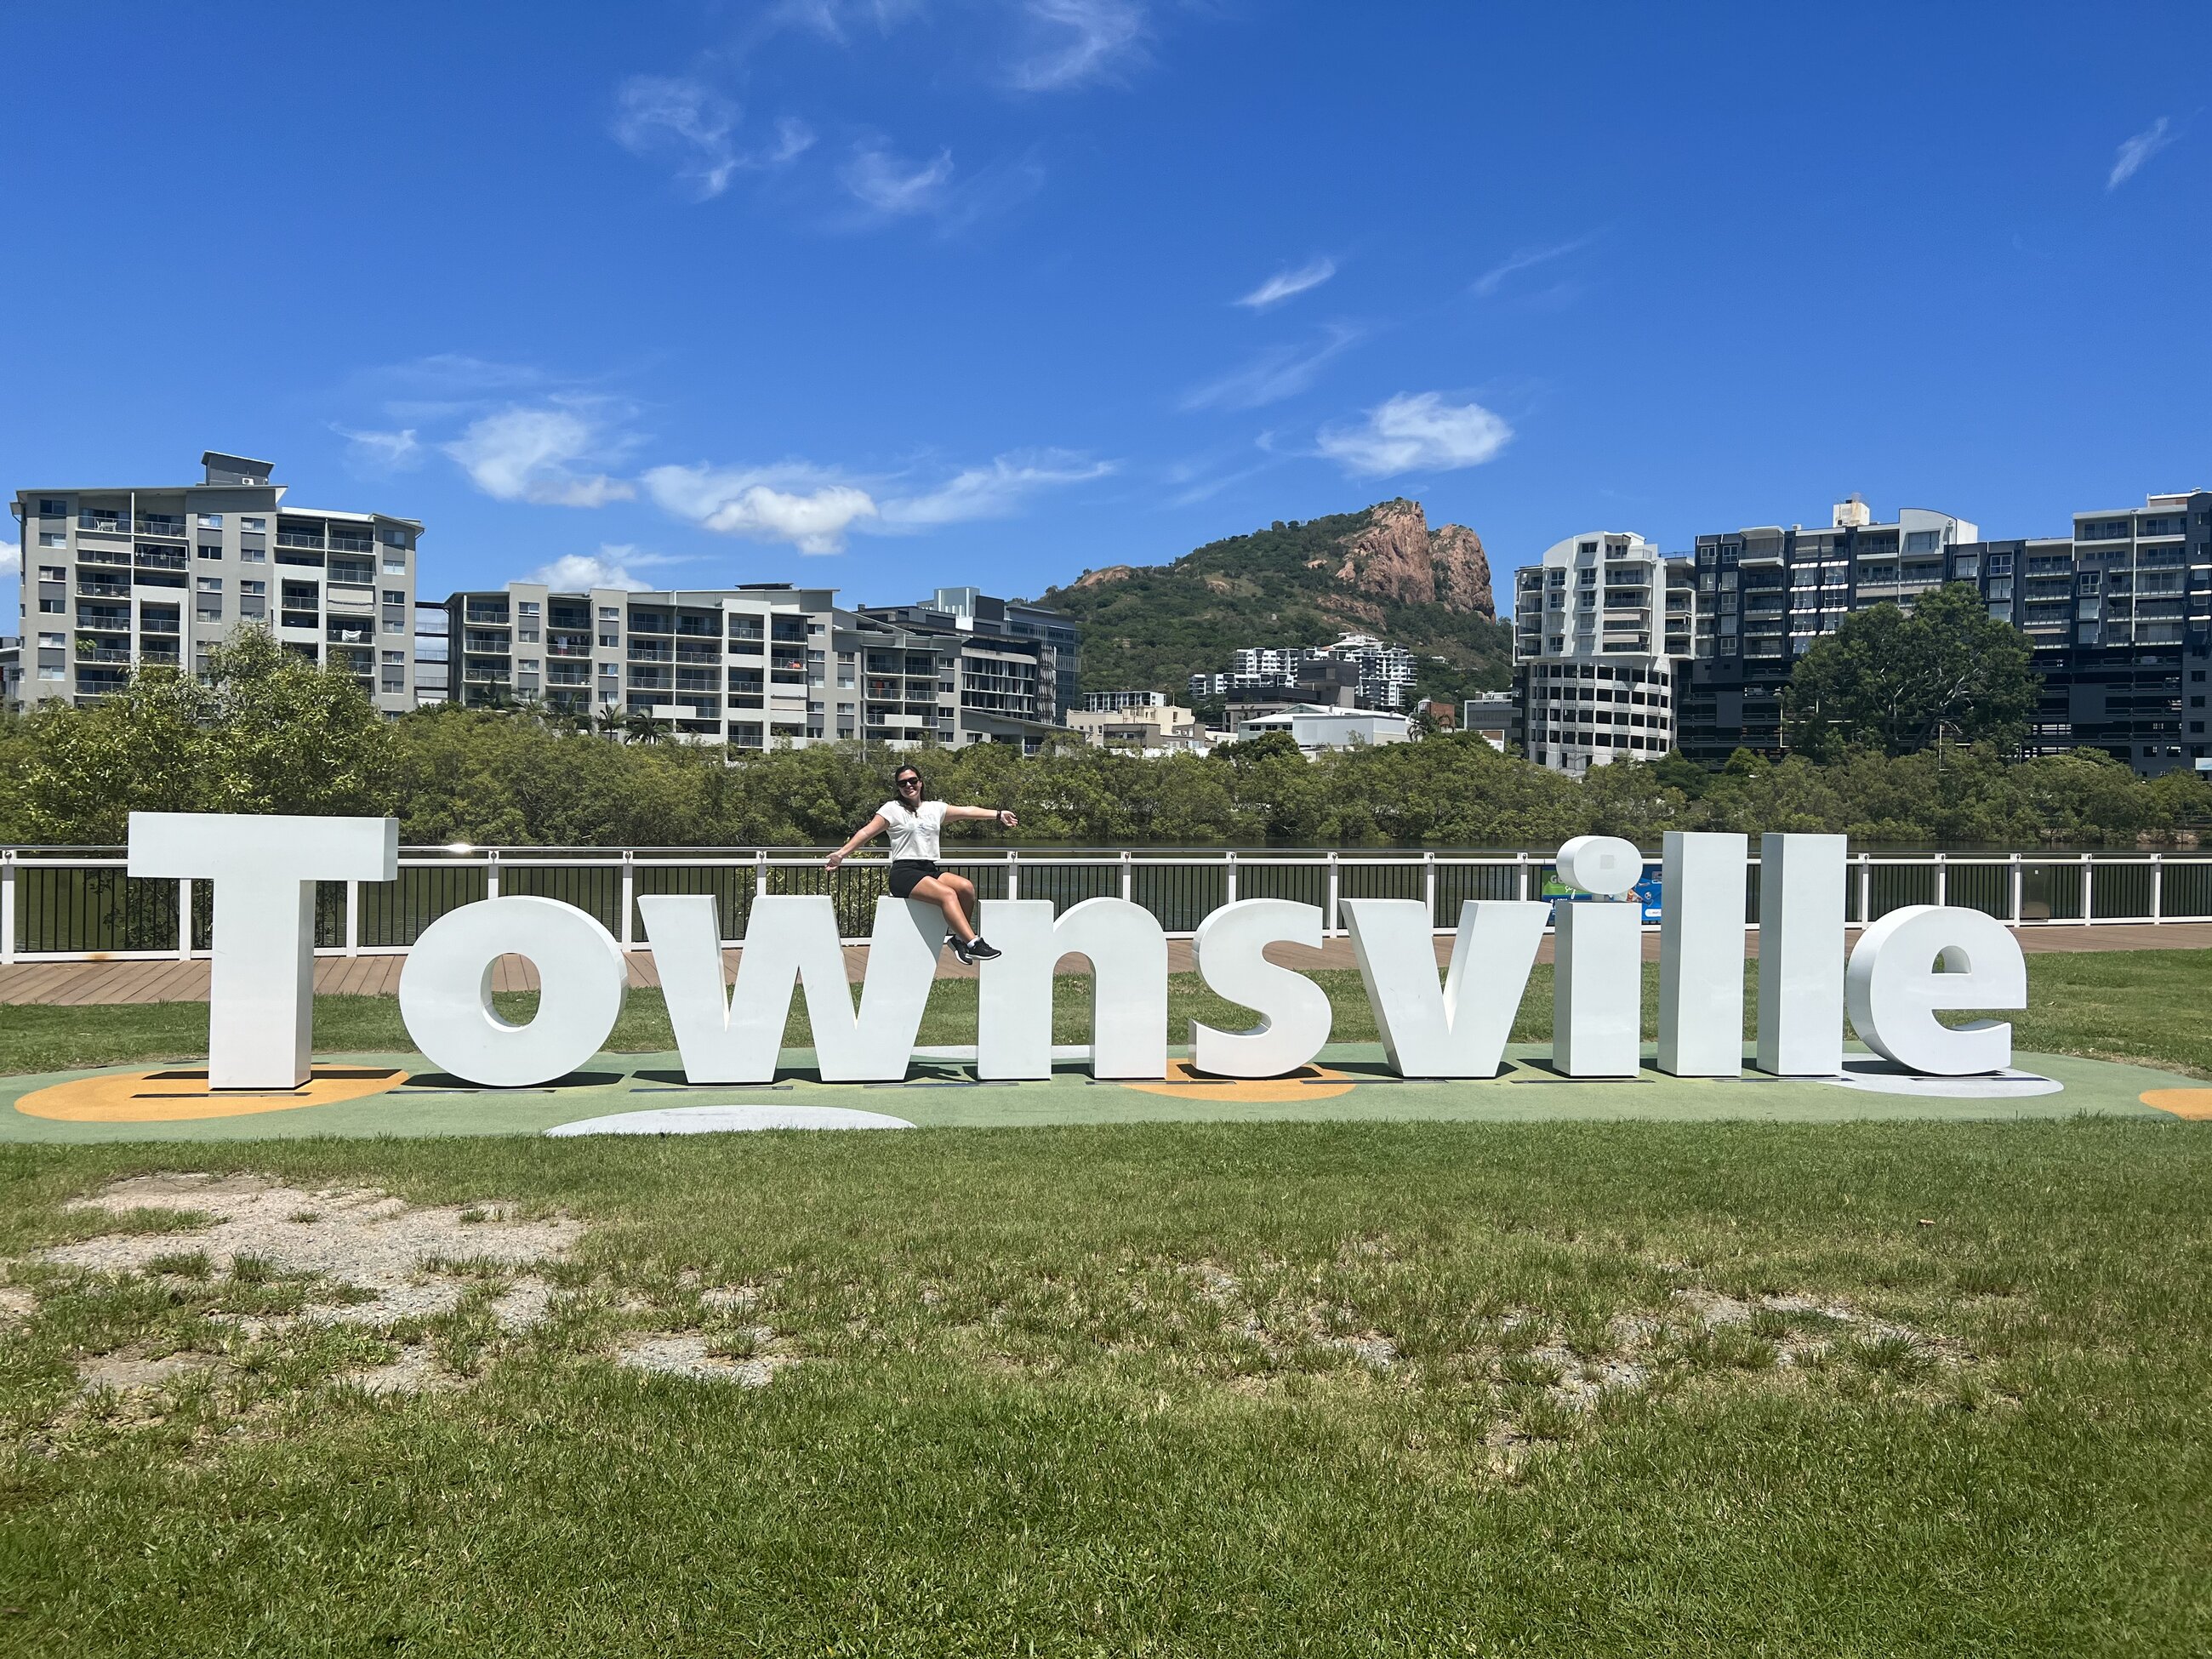 This image was taken during my first week in Townsville, and I already knew that I loved and wanted to be in this small town. 